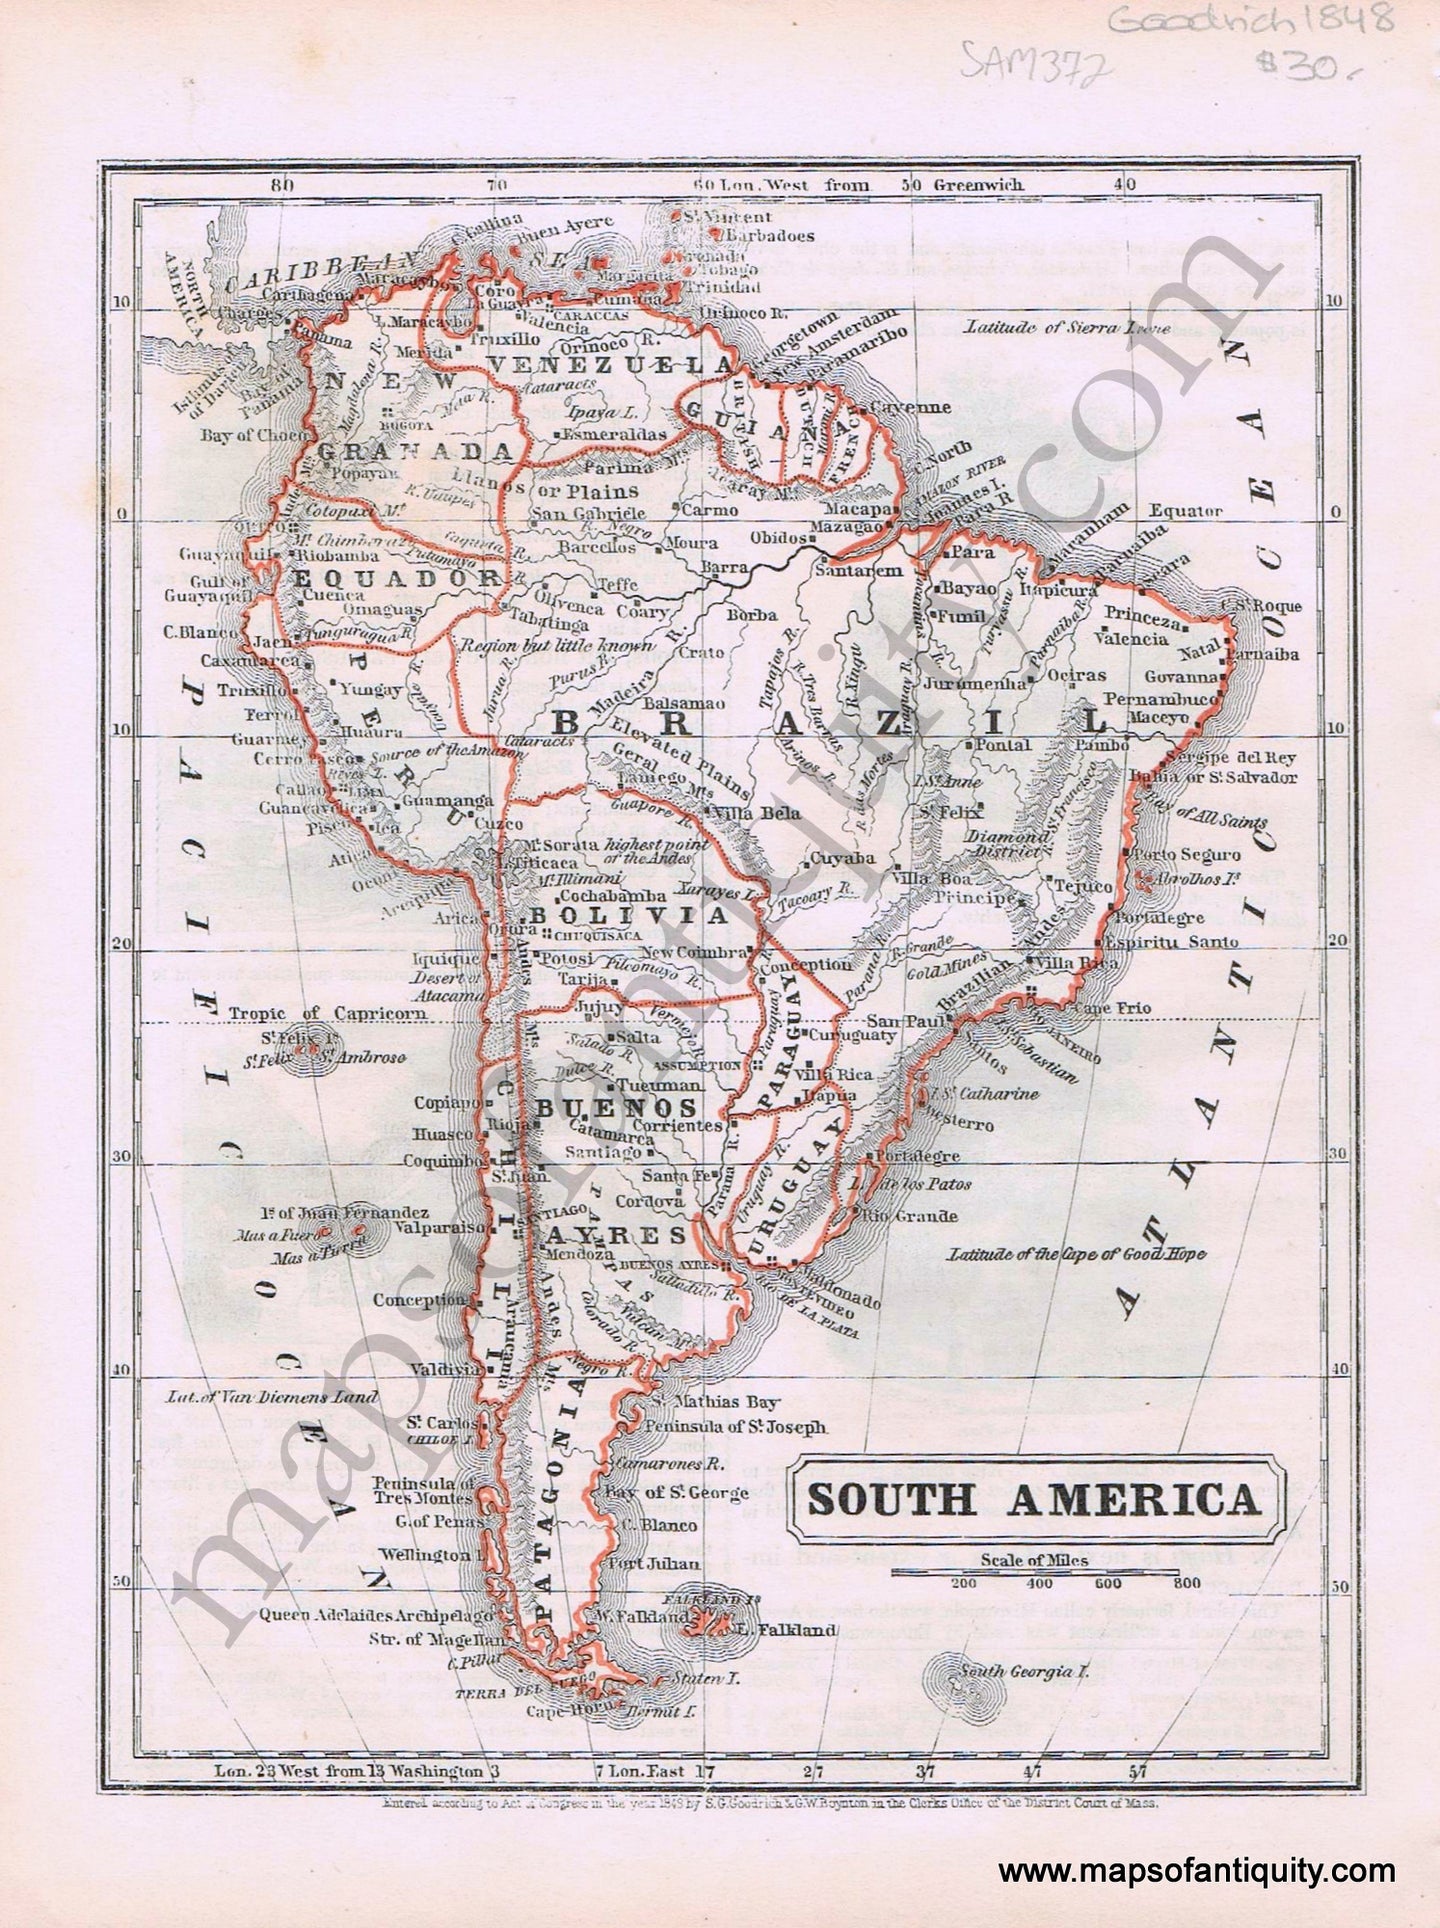 Antique-Printed-Color-Map-South-America-1848-Goodrich-1800s-19th-century-Maps-of-Antiquity